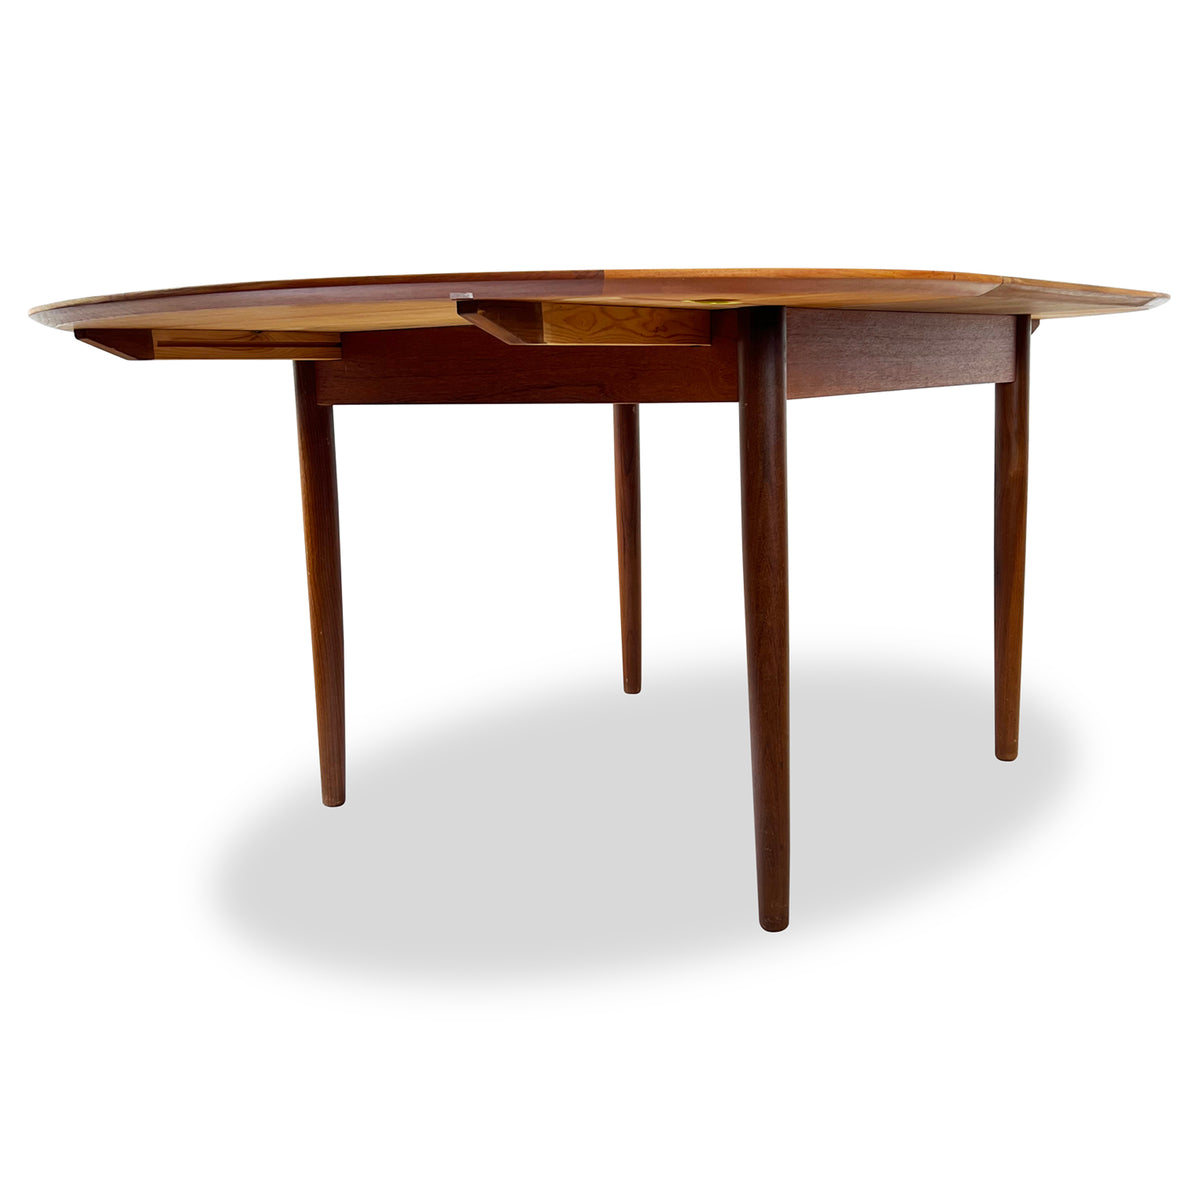 Teak Butterfly Leaf Dining Table